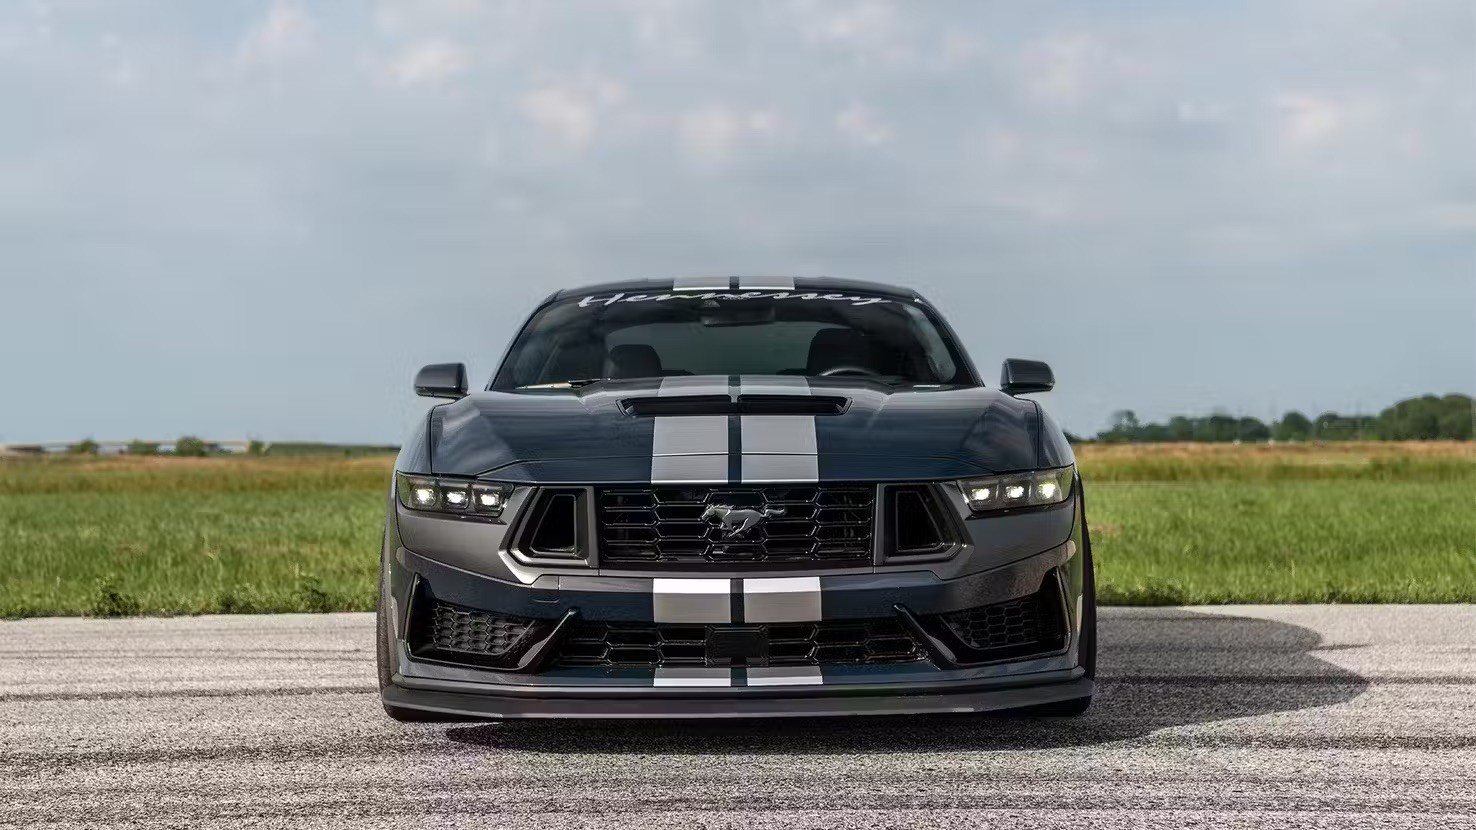 Video: Hennessey Supercharges the Mustang Dark Horse to 850 Horsepower